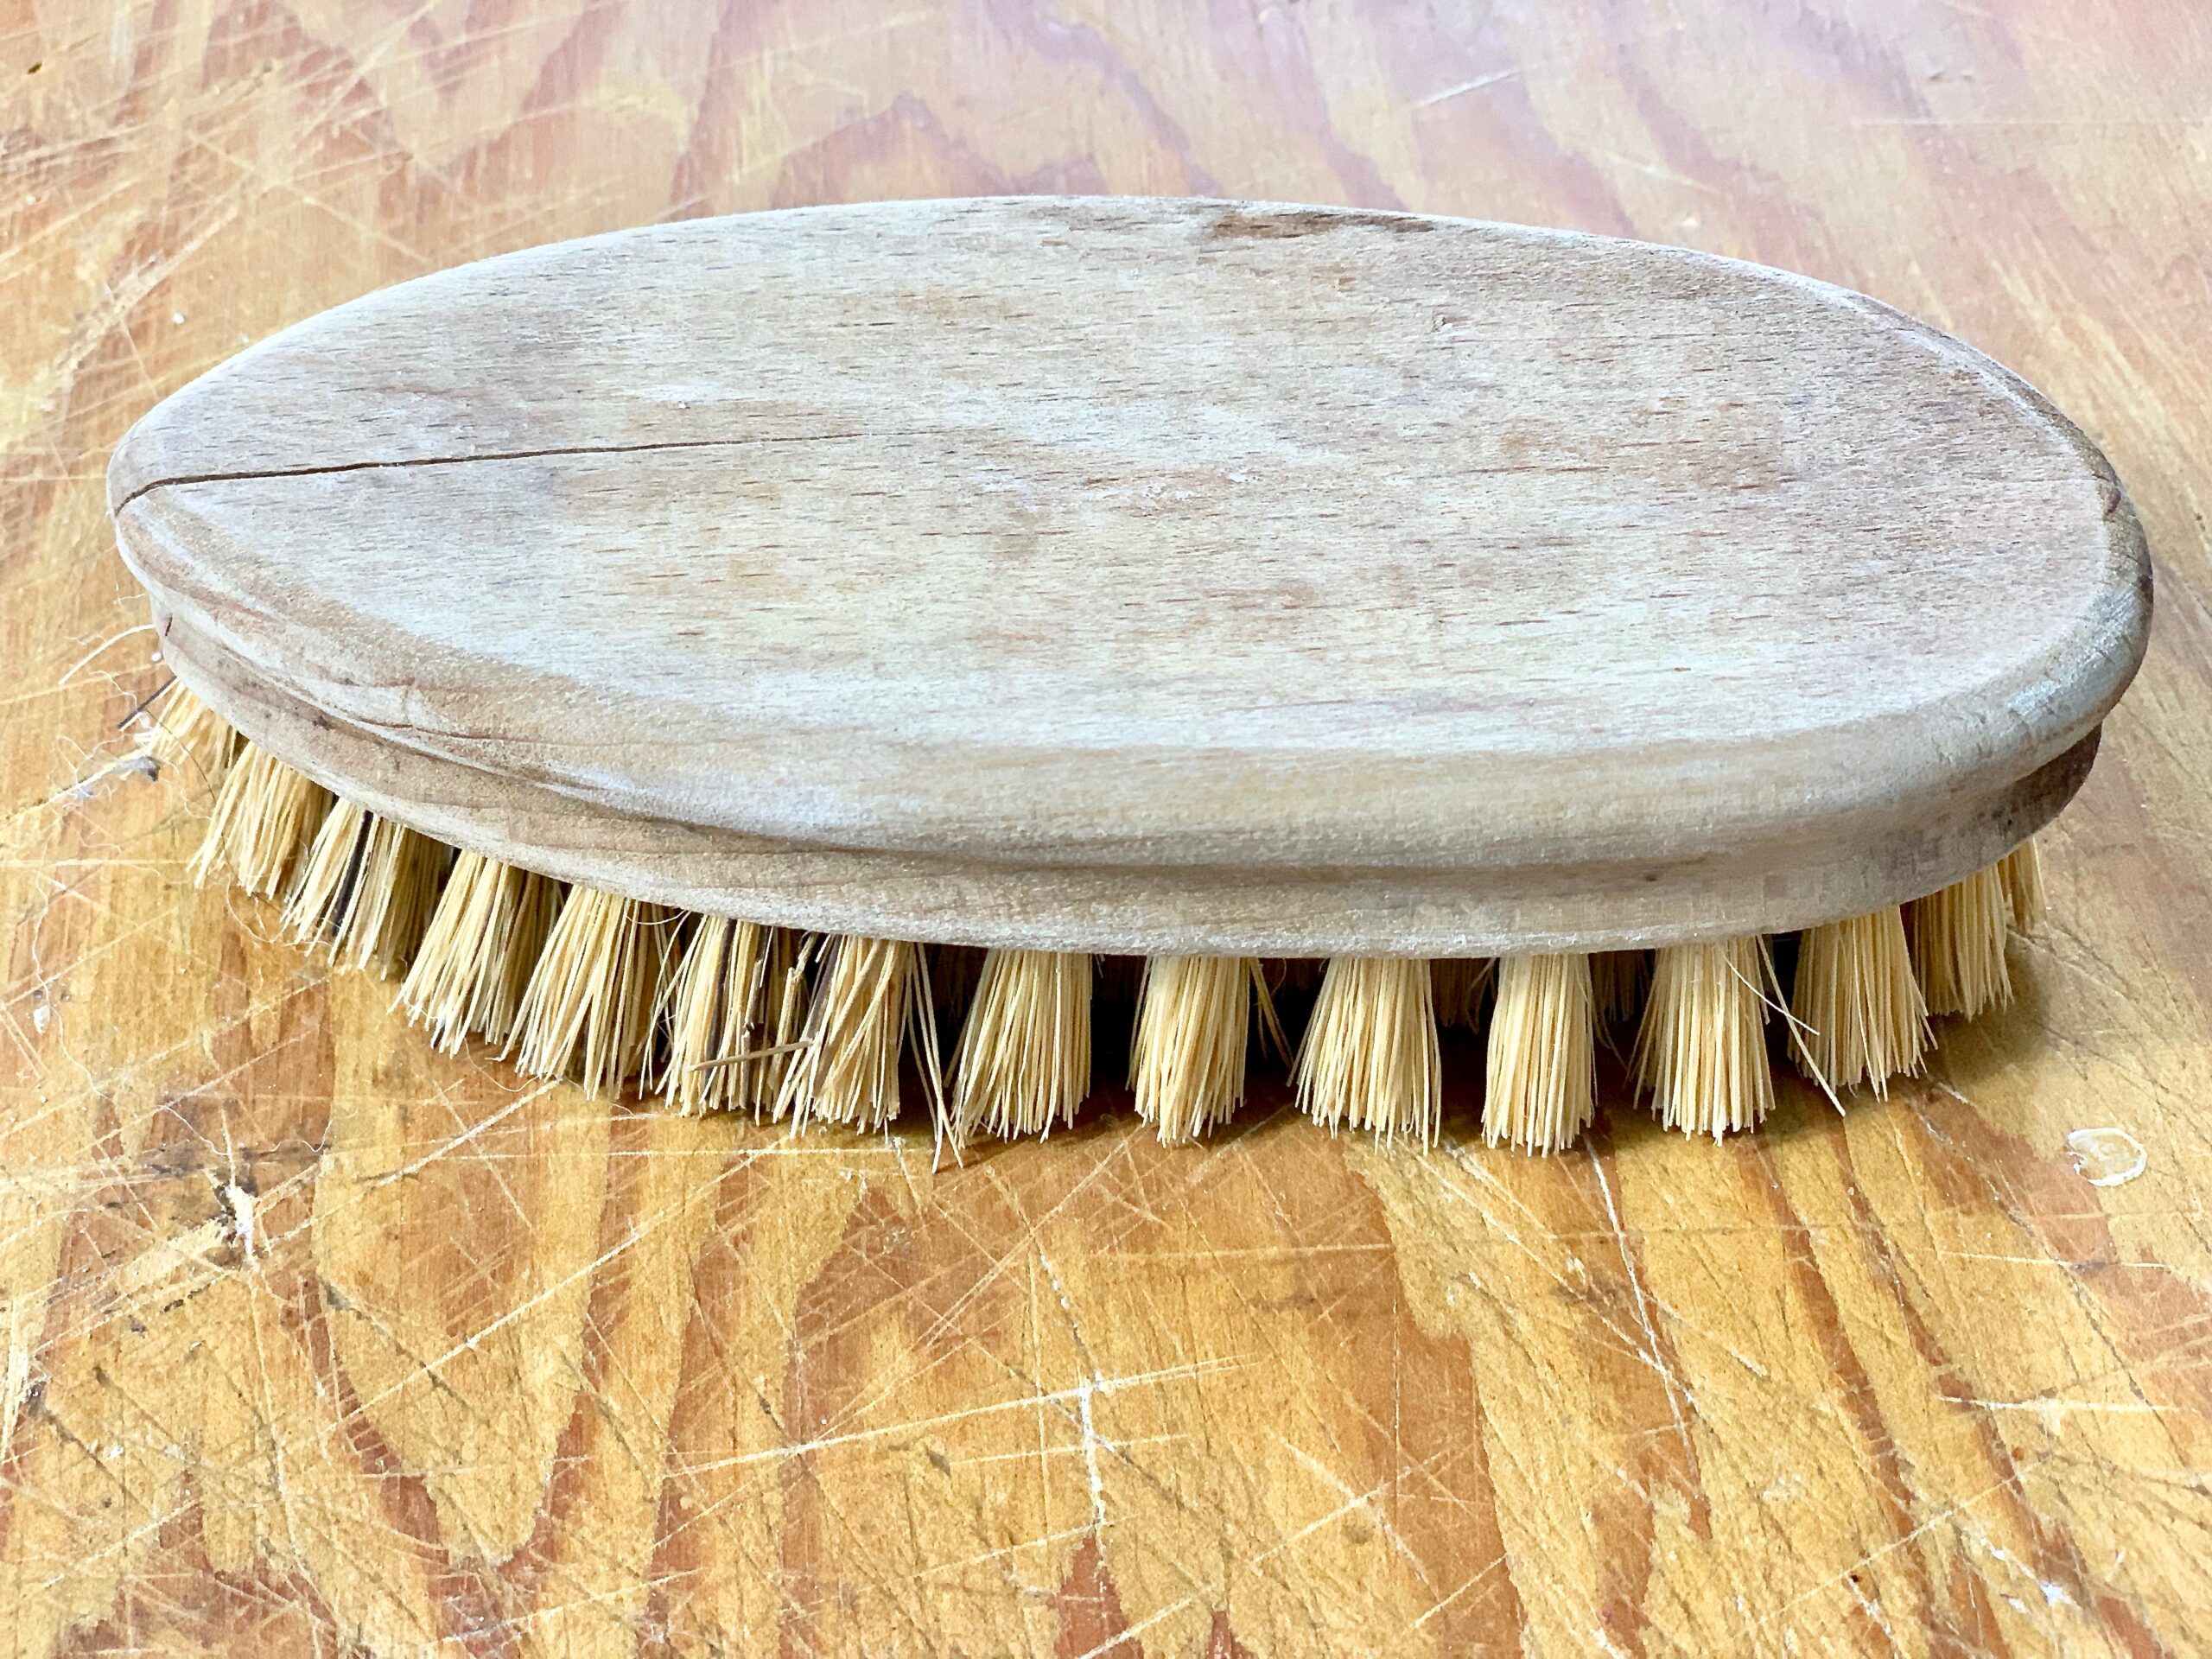 wooden brush with natural bristles